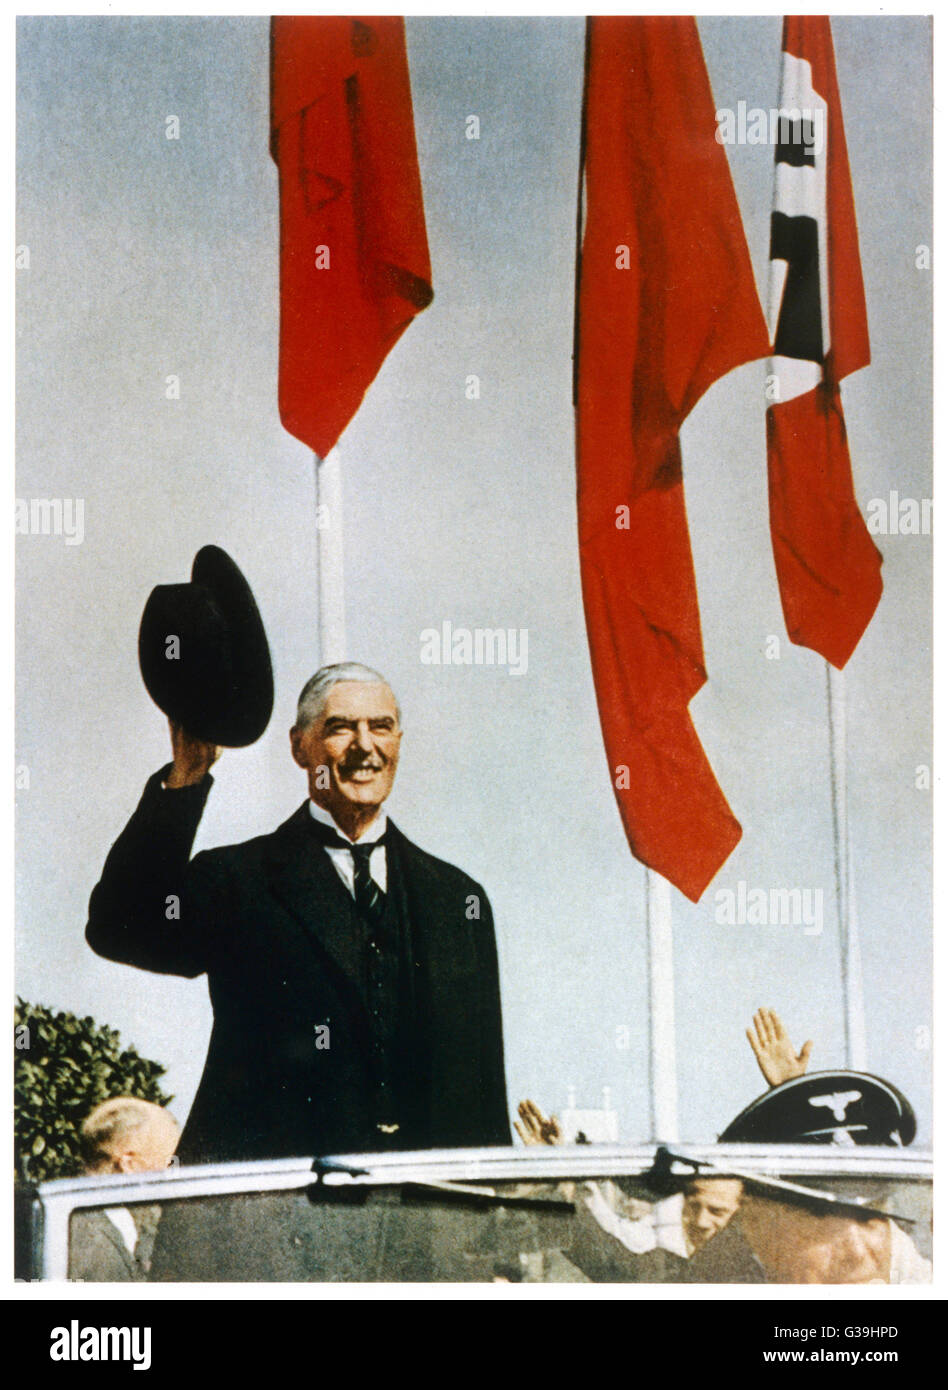 British Prime Minister, Neville Chamberlain (1869-1940), waves from an open-top car, shortly after arriving in Munich for a meeting with Adolf Hitler over threats to invade Czechoslovakia.      Date: 29th September 1938 Stock Photo